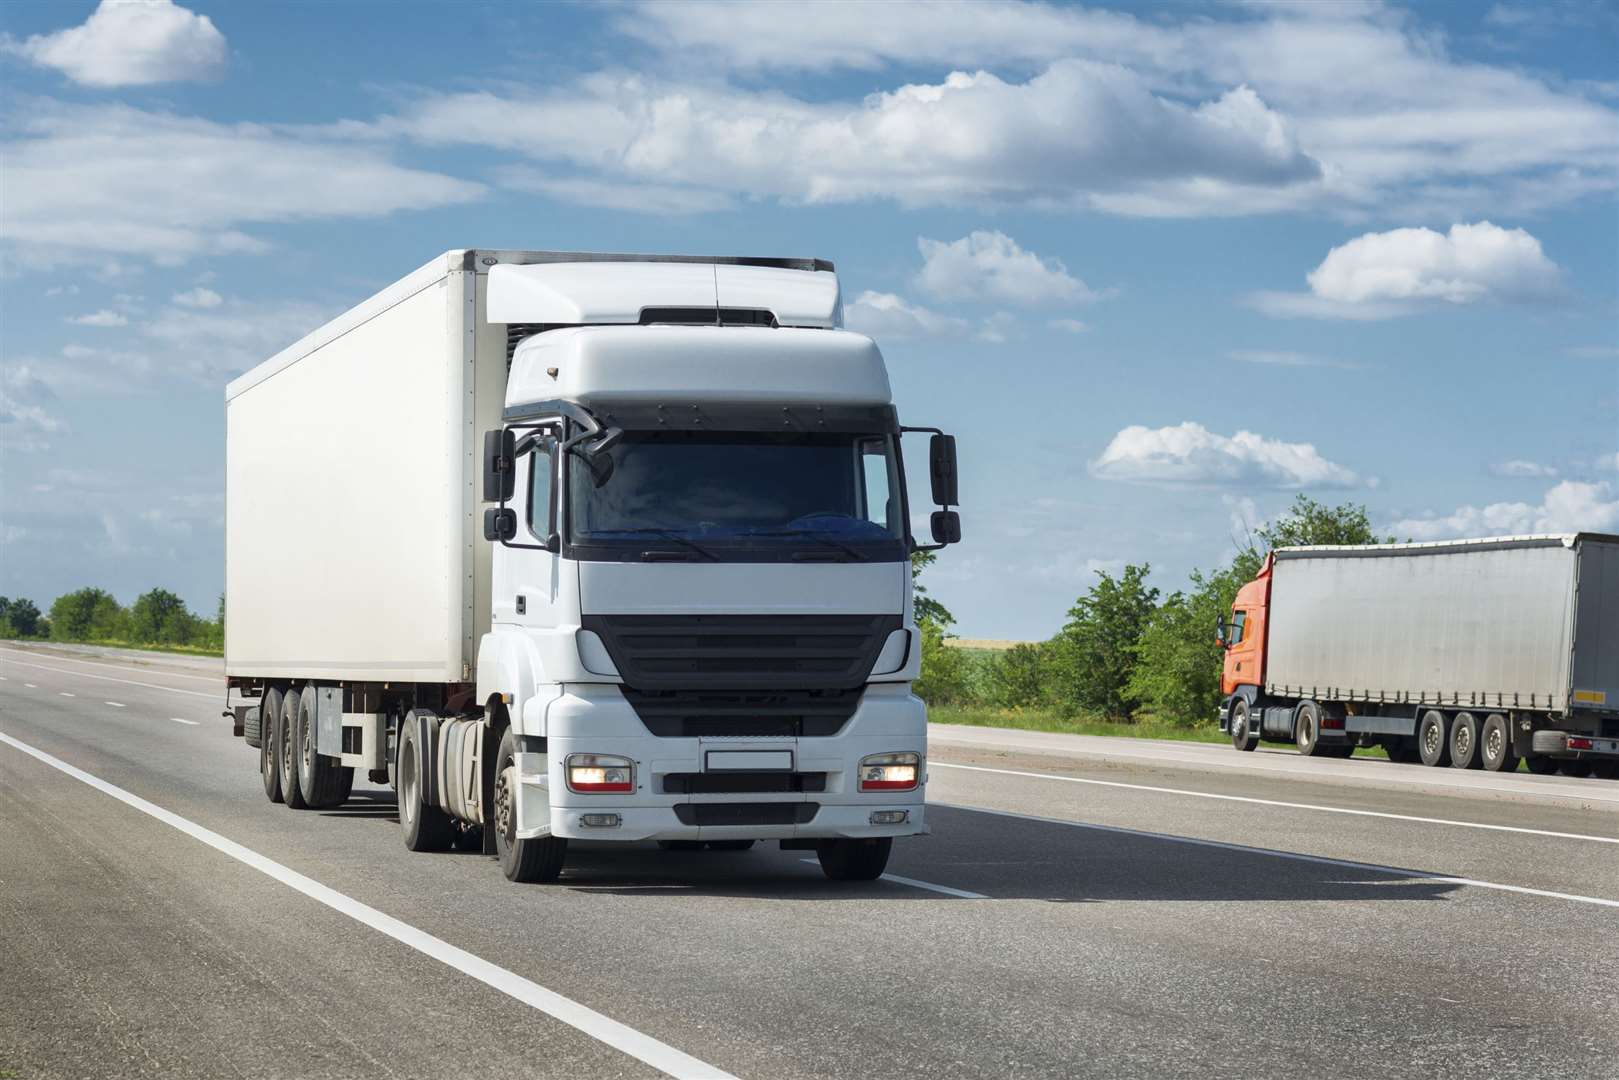 HGV driving training will be on offer in Lynn as part of the scheme. Picture: iStock